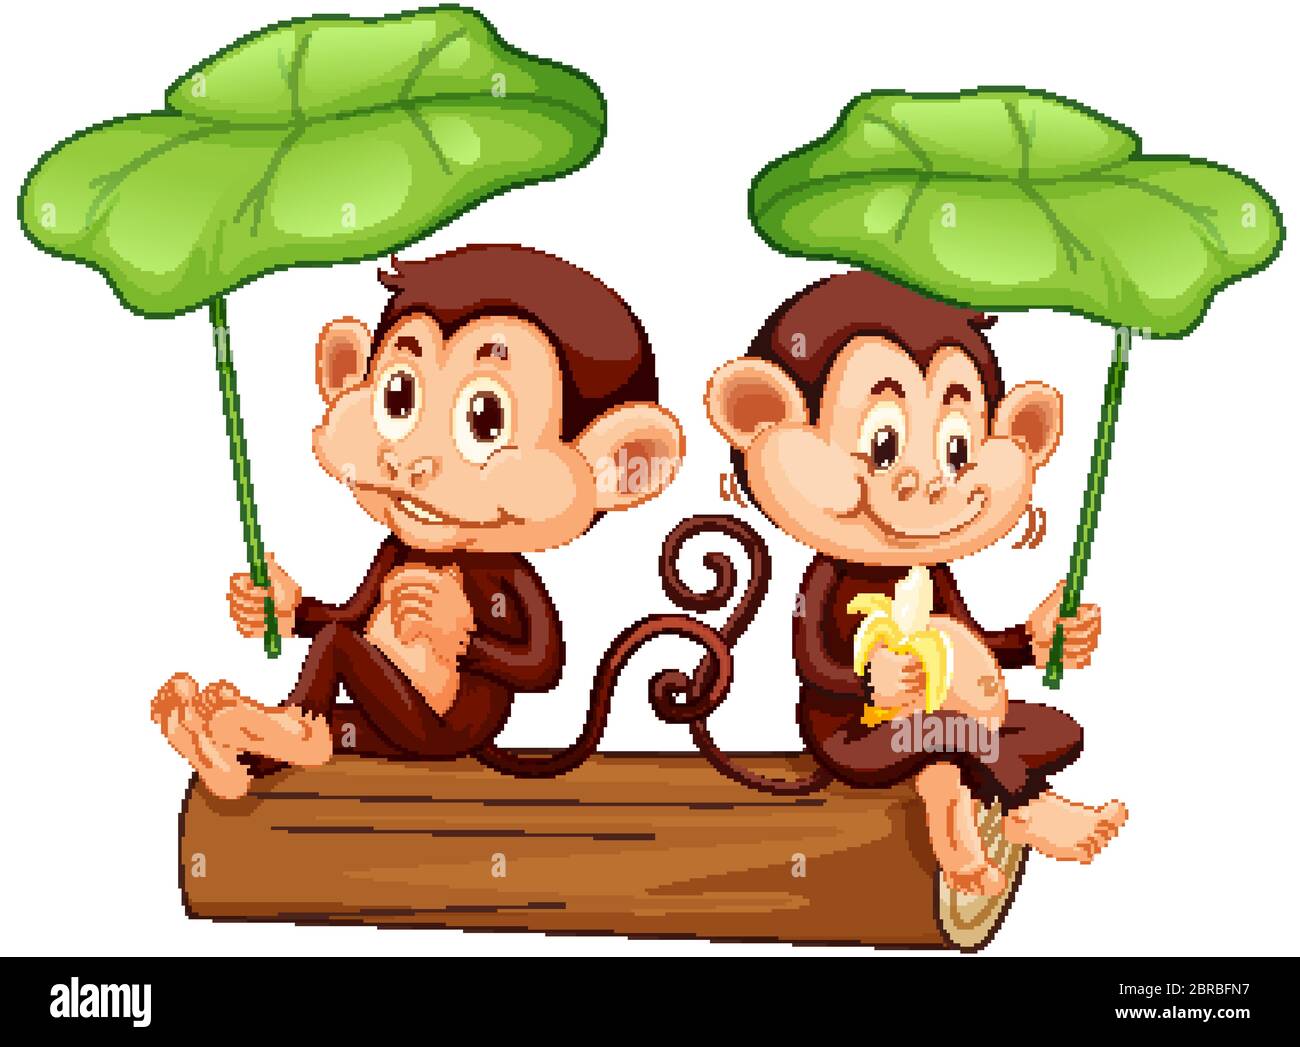 Two cute monkeys on the log with green leaves illustration Stock Vector